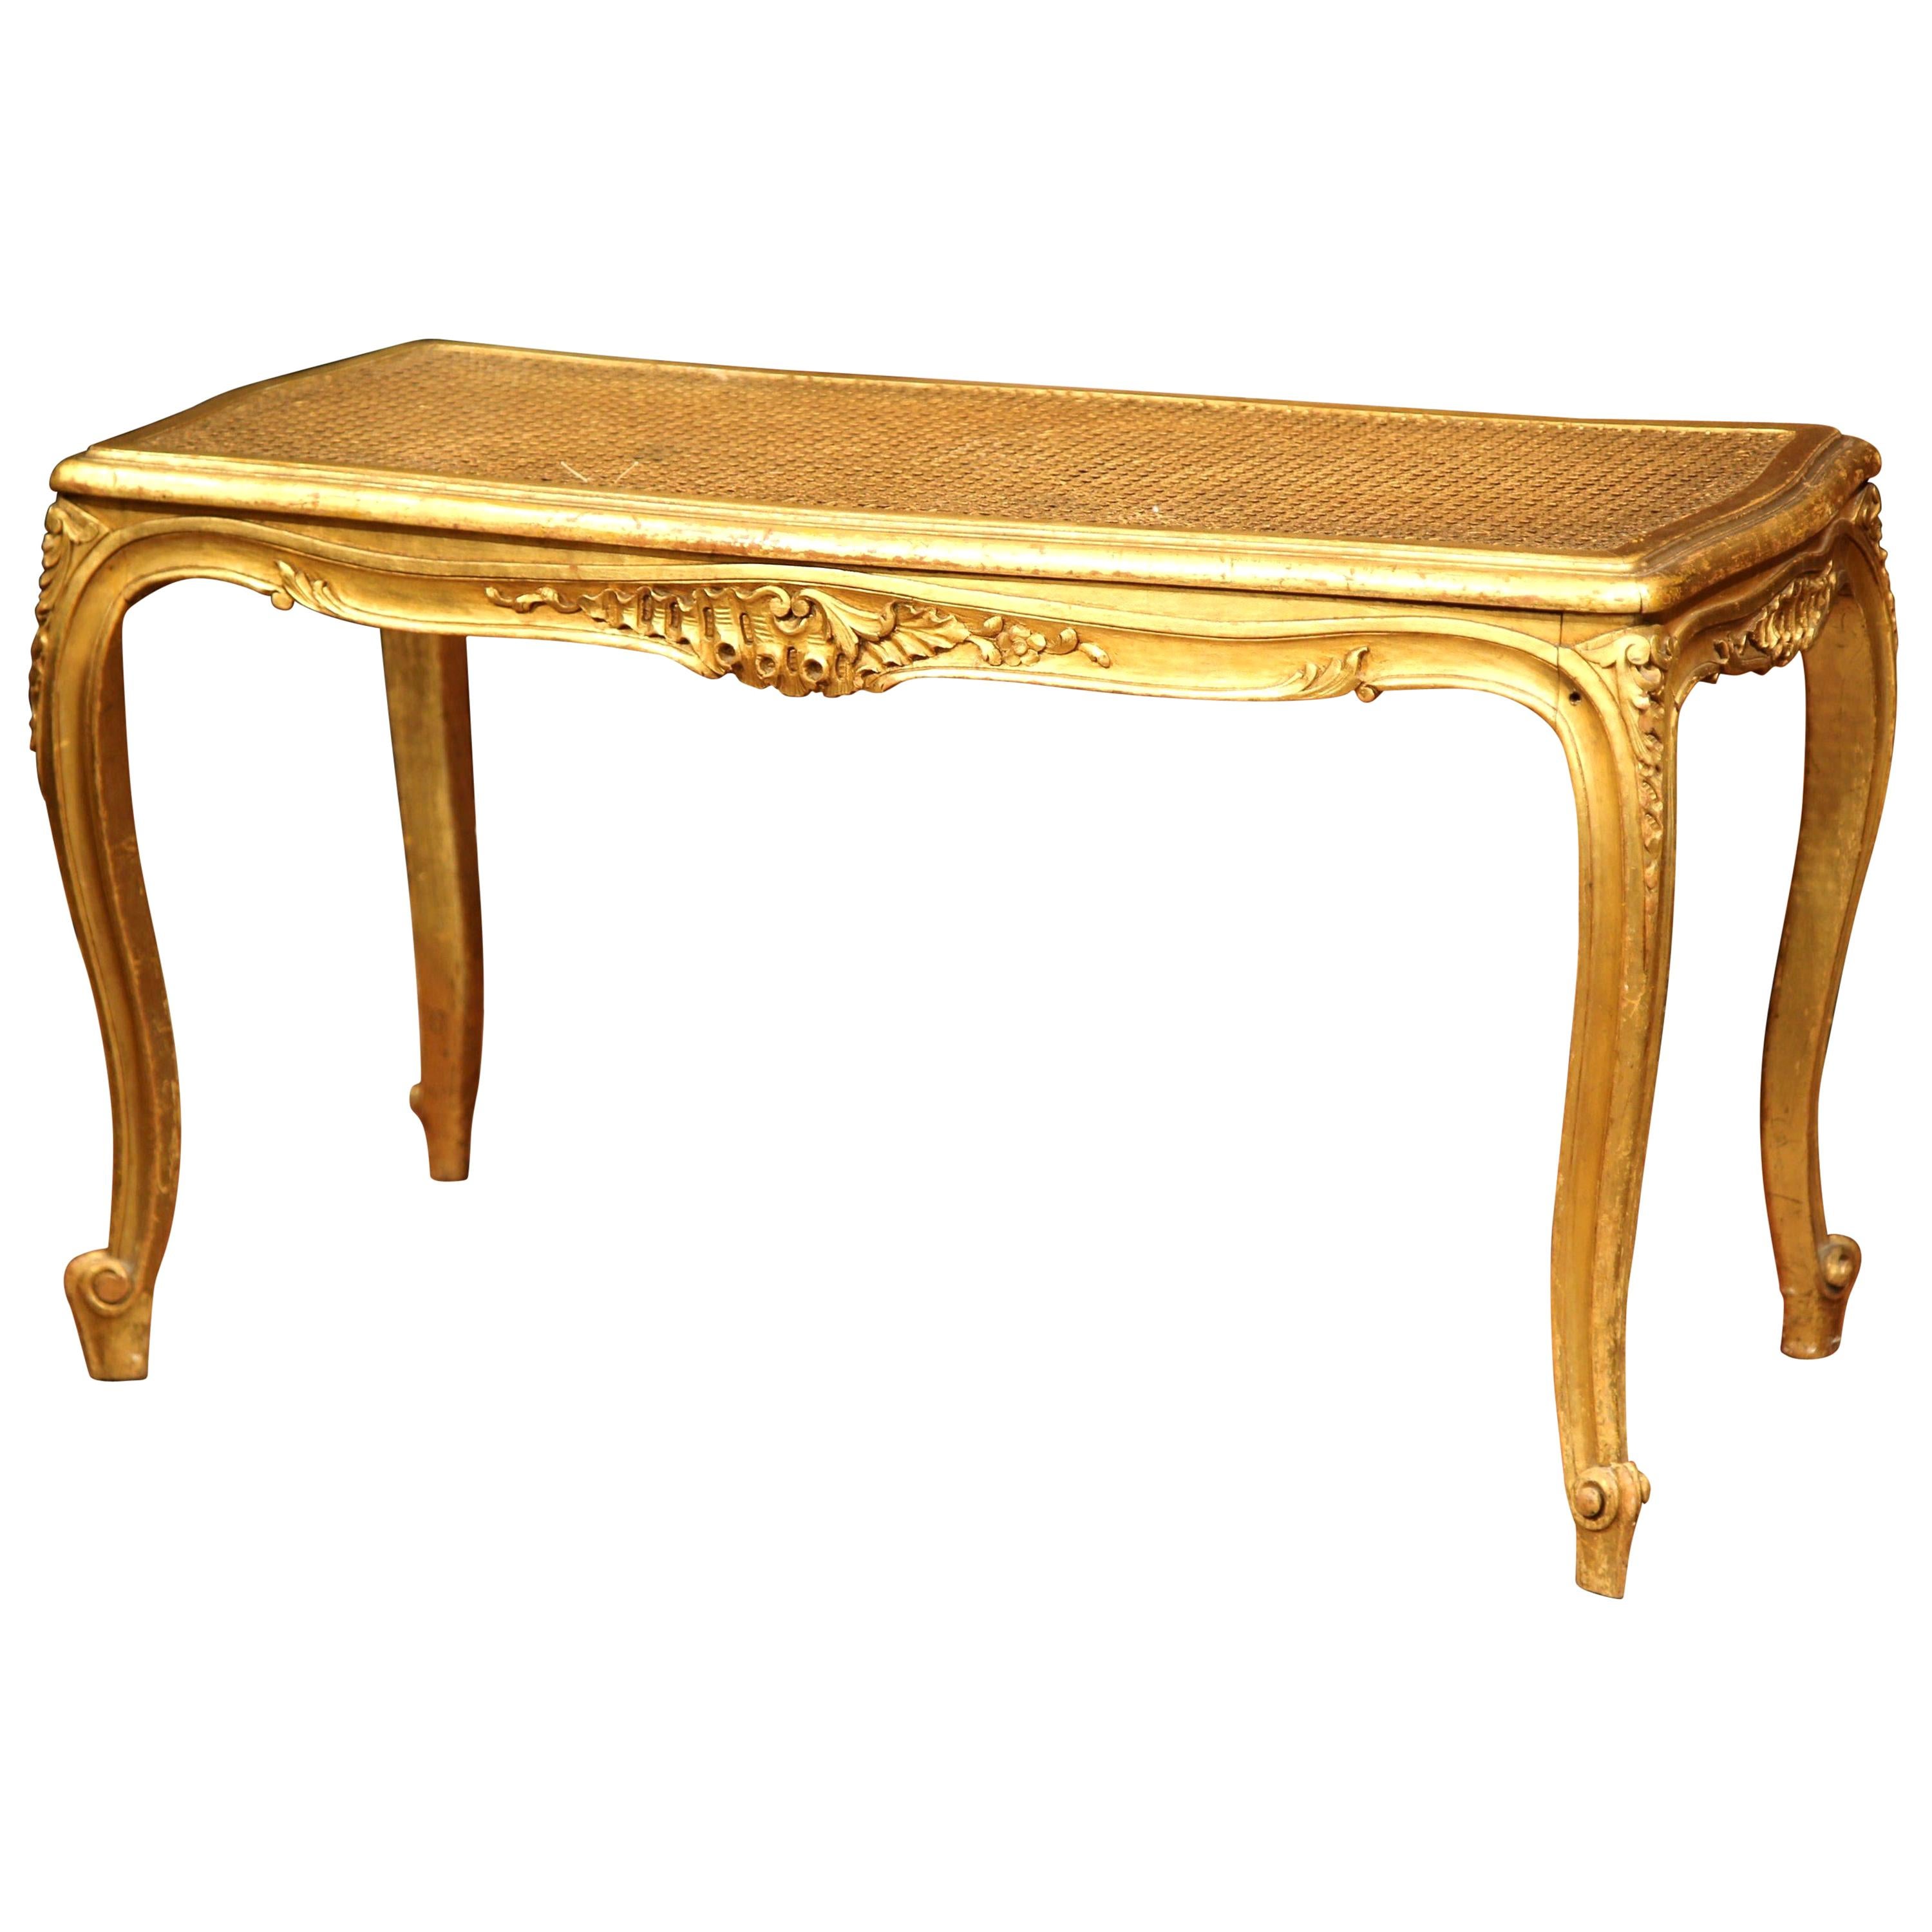 19th Century French Louis XV Carved Giltwood Piano Bench with Cane Seat